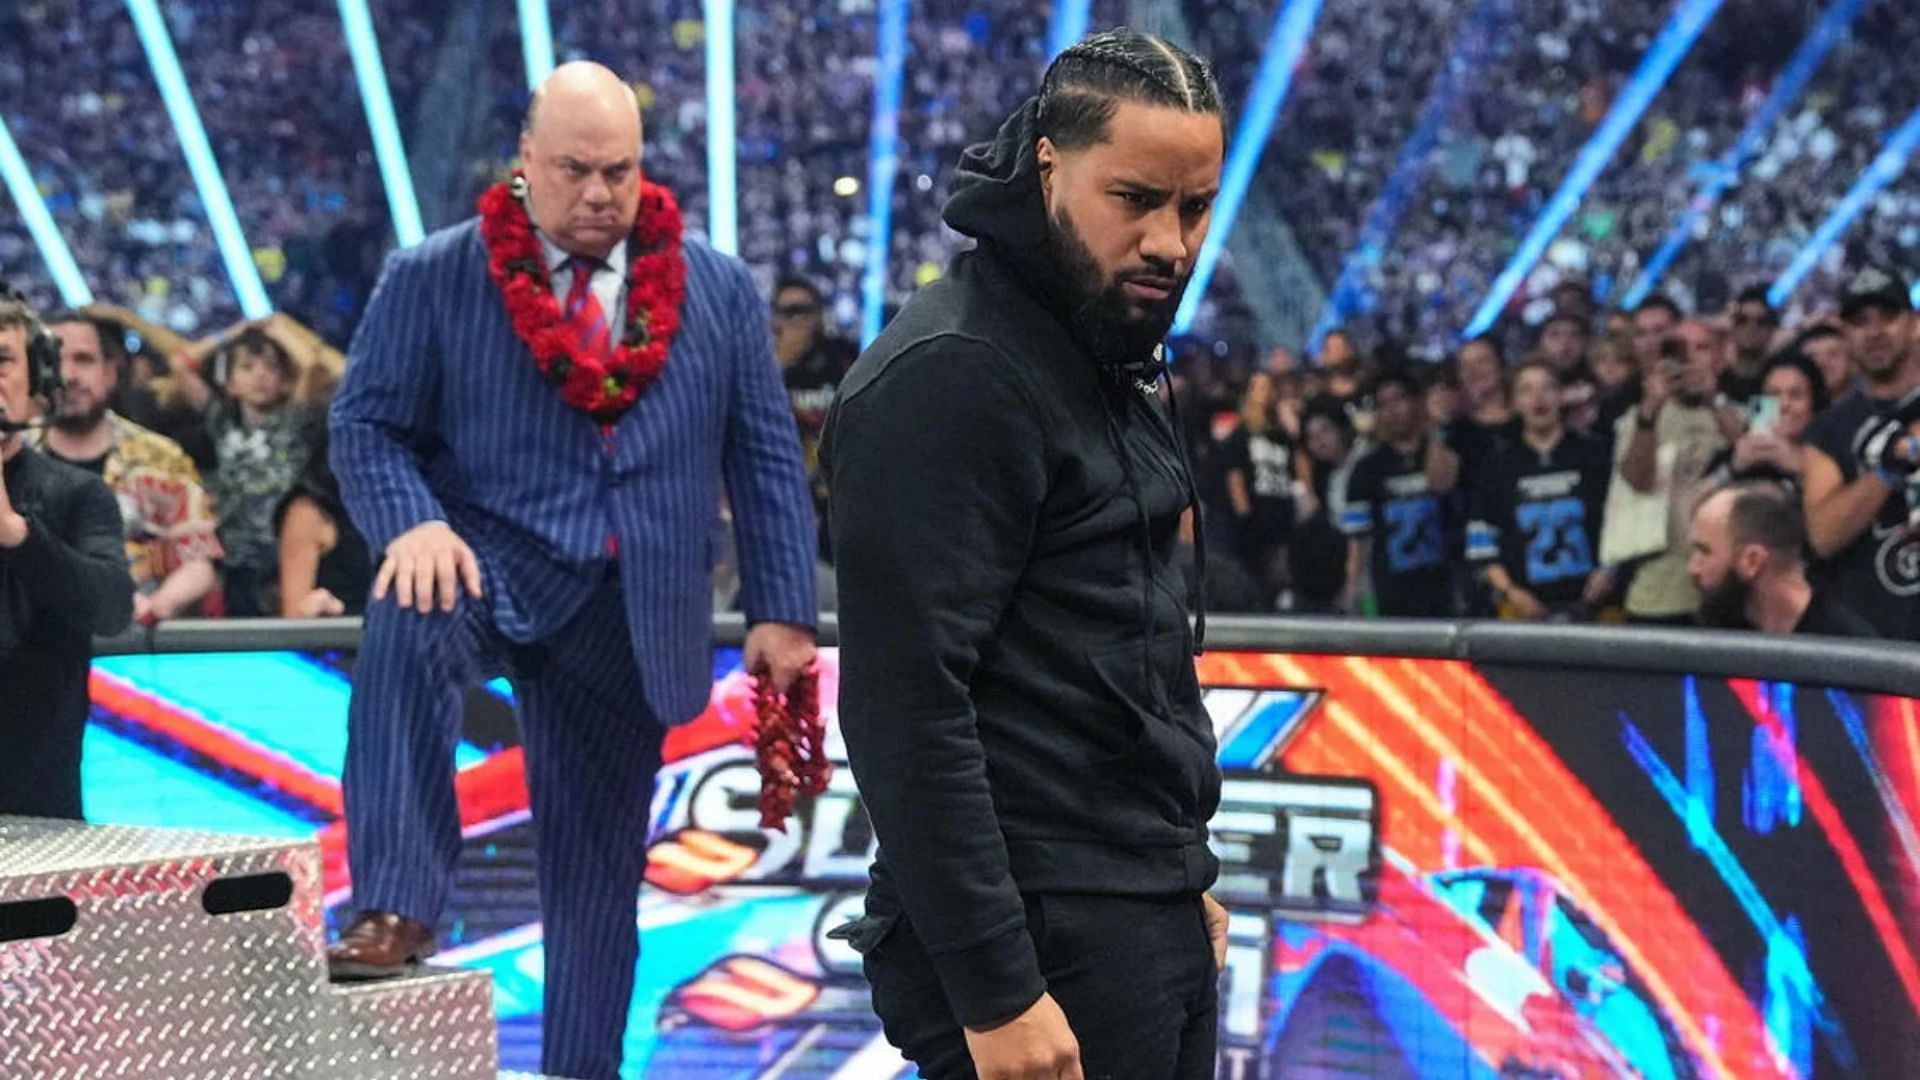 Could Heyman and Reigns have corrupted Jimmy Uso prior to WWE Summerslam 2023?